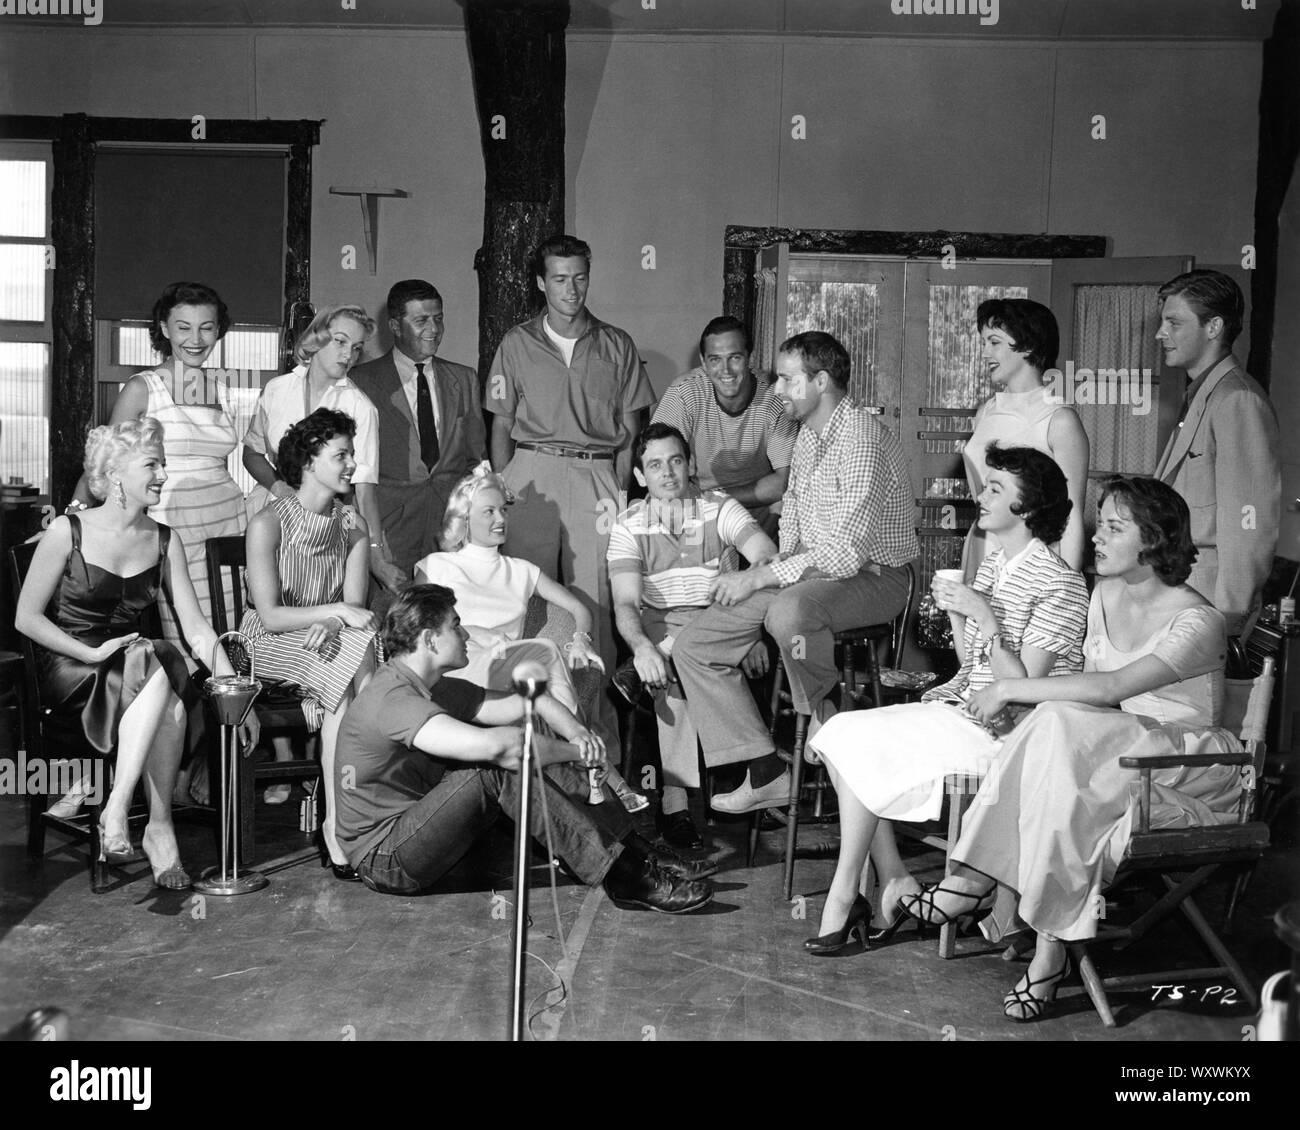 MARLON BRANDO visits students at UNIVERSAL - INTERNATIONAL STUDIOS SCHOOL OF MOTION PICTURE DRAMA  in 1955 including CLINT EASTWOOD MAMIE VAN DOREN DAVID JANSSEN and GRANT WILLIAMS Universal Pictures Company, Inc. Stock Photo